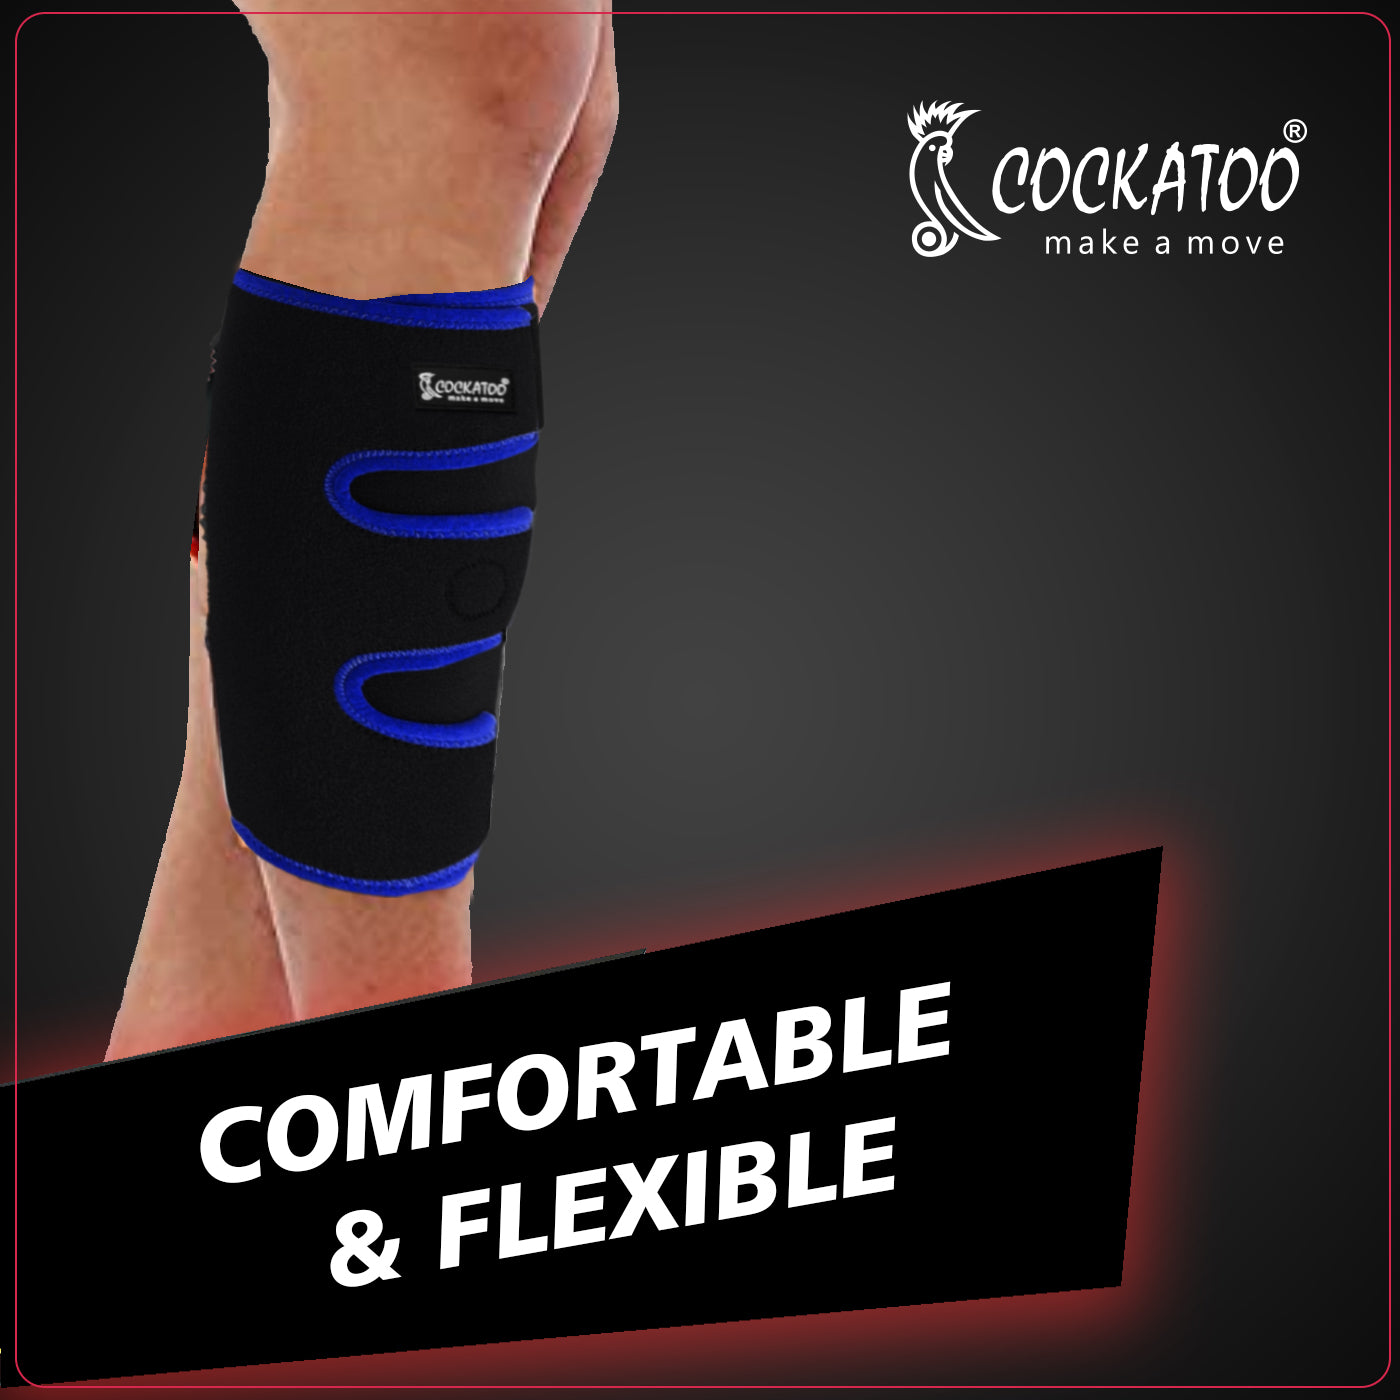 Cockatoo Calf Support Brace - Shin Splint Compression Sleeve - Lower Leg Wrap Support for Torn Calf Muscle, Strain, Sprain, Pain Relief - Suitable for Tennis Leg - Unisex